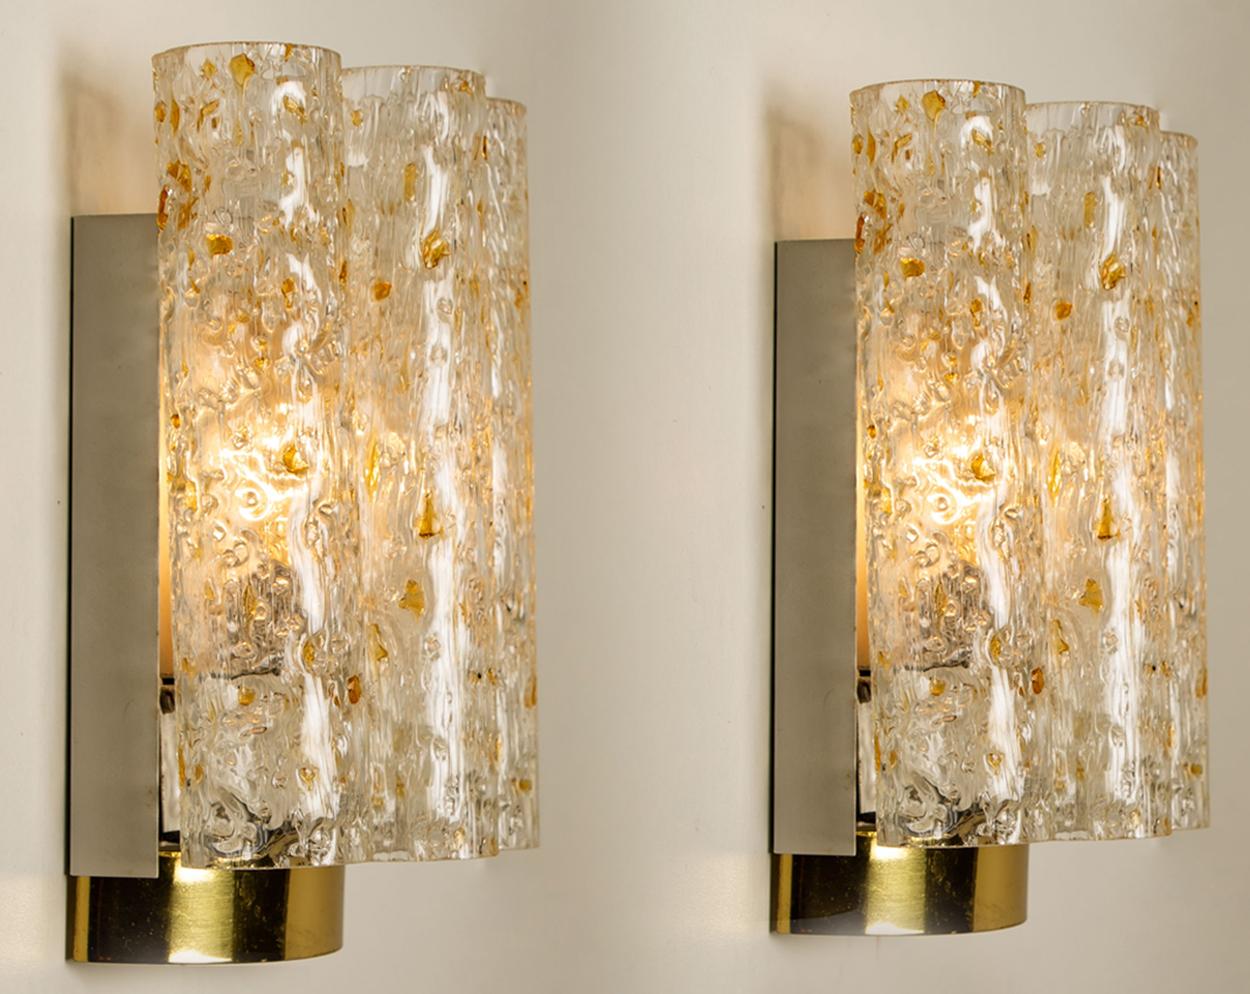 1 of the 6 Doria Wall Lamps in Brass and Glass, 1960s For Sale 5